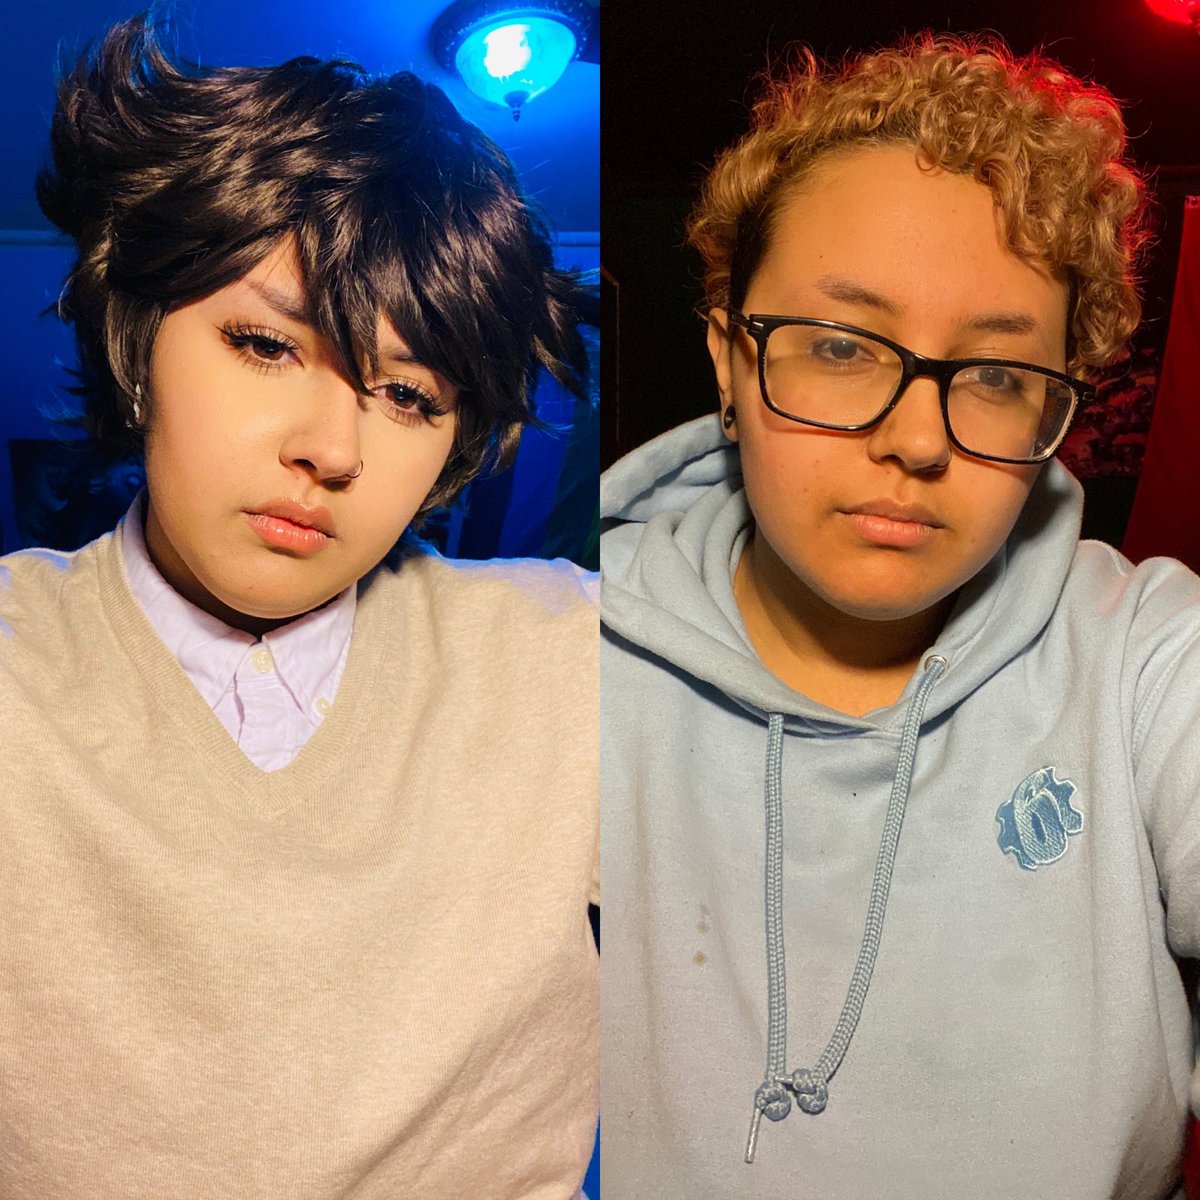 Adding back onto this thread because I think repainting my room somehow fixed my problem??? The only difference in these photos is that and the blue to red lights Before repainting vs after repainting